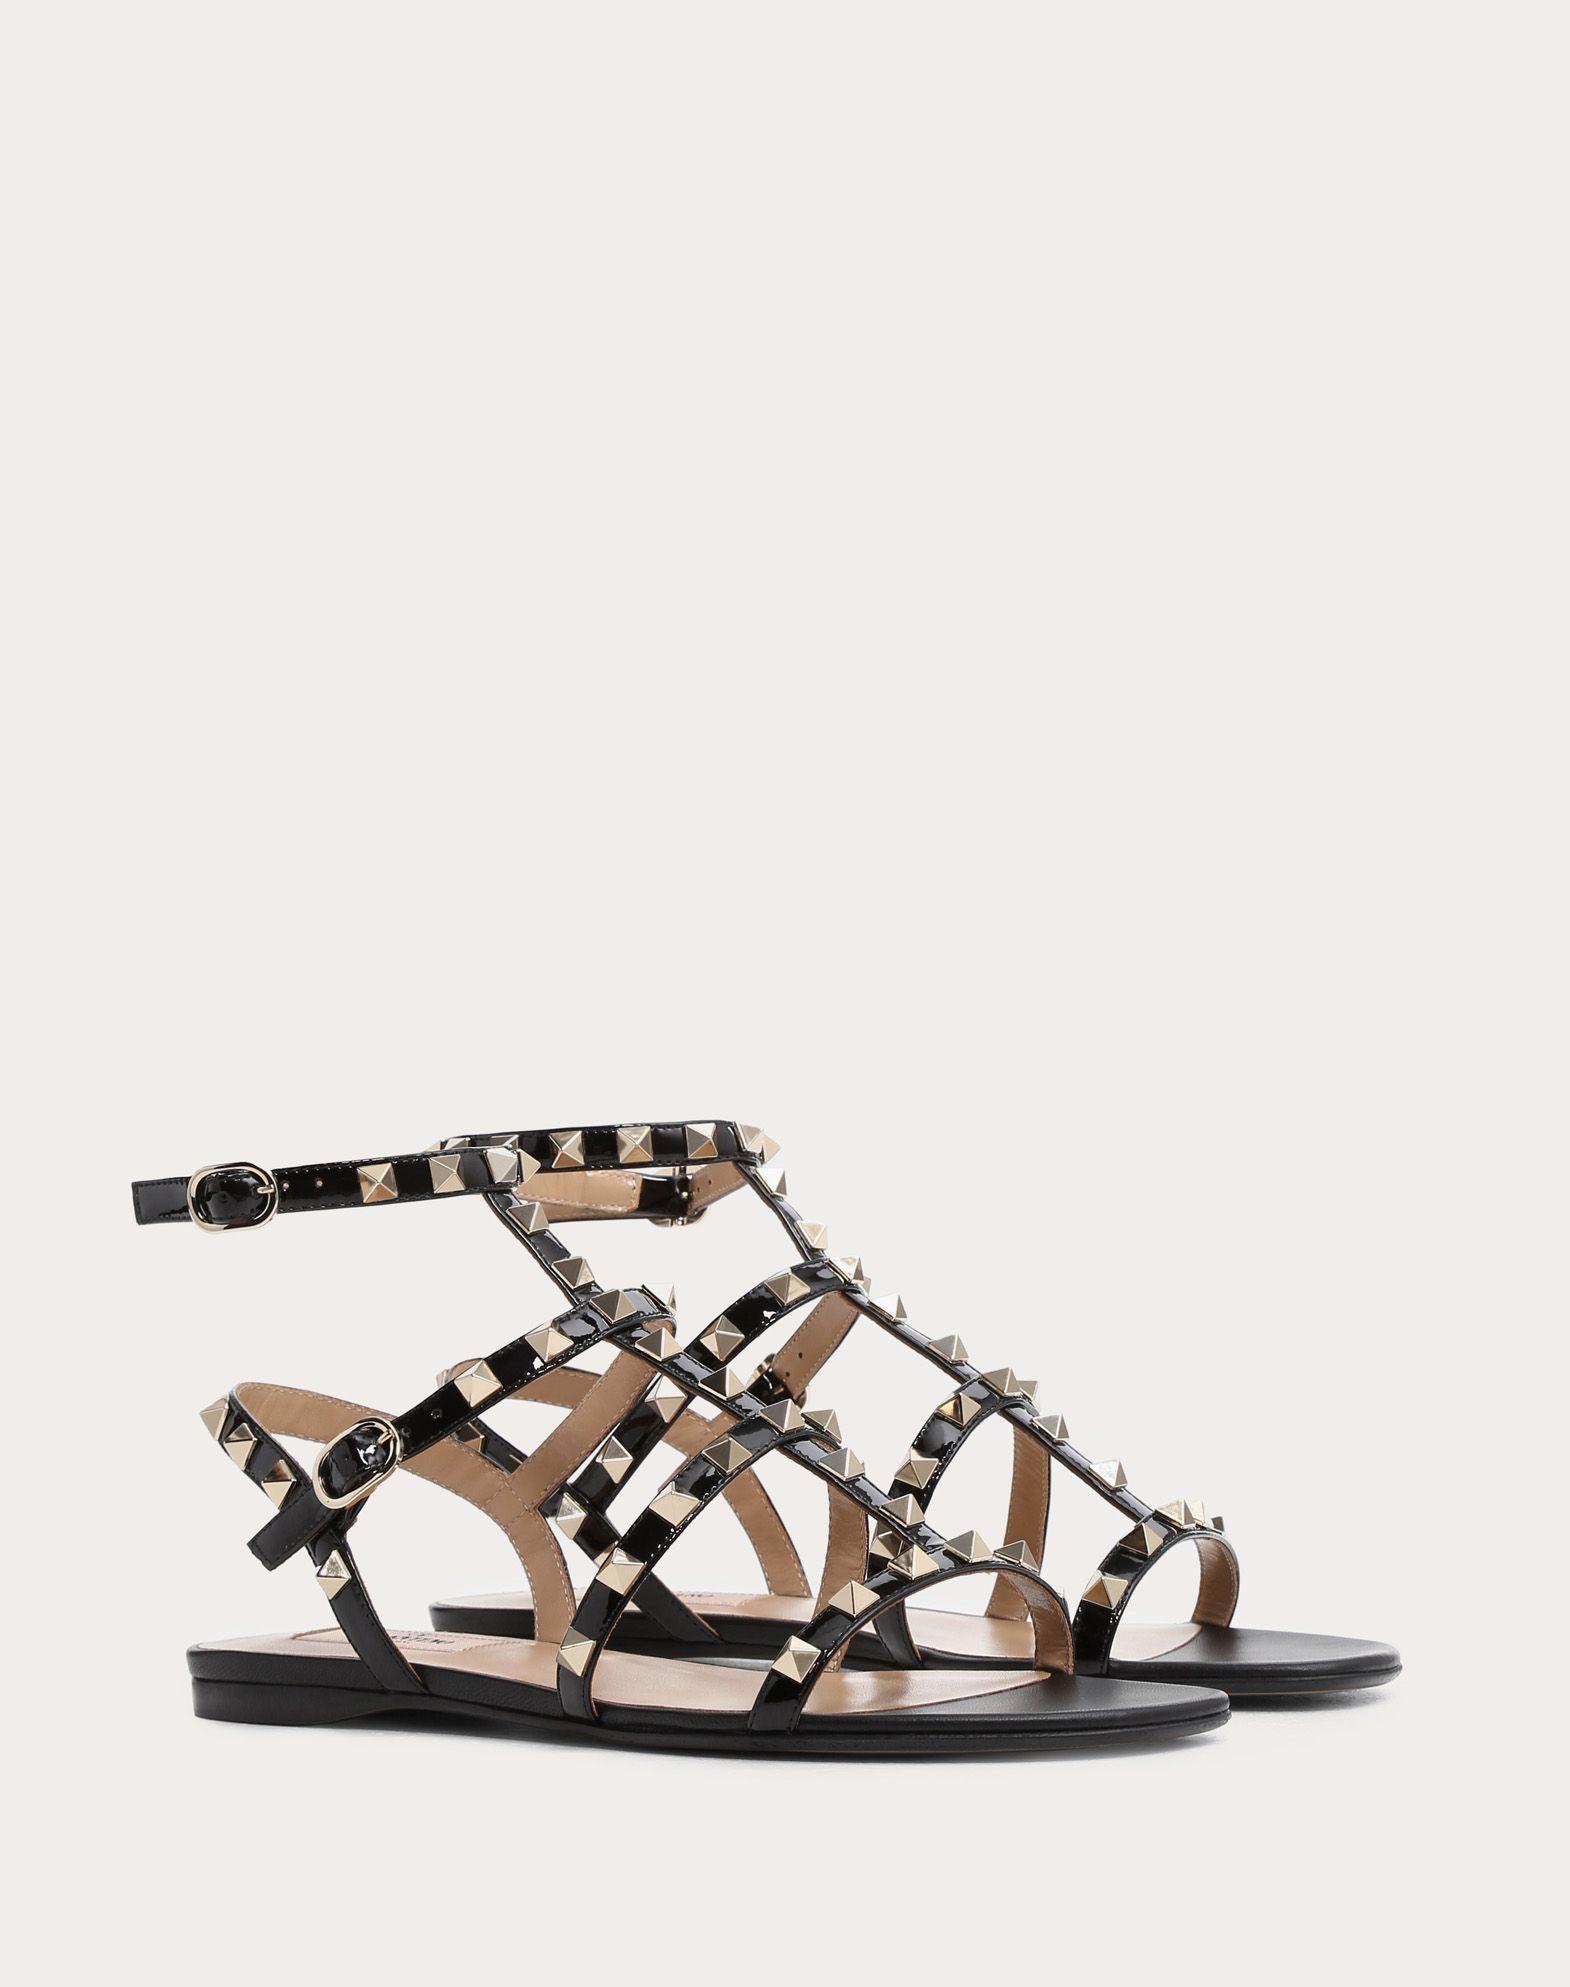 Valentino Leather Patent Cage Rockstud Flat Sandal in Black - Lyst